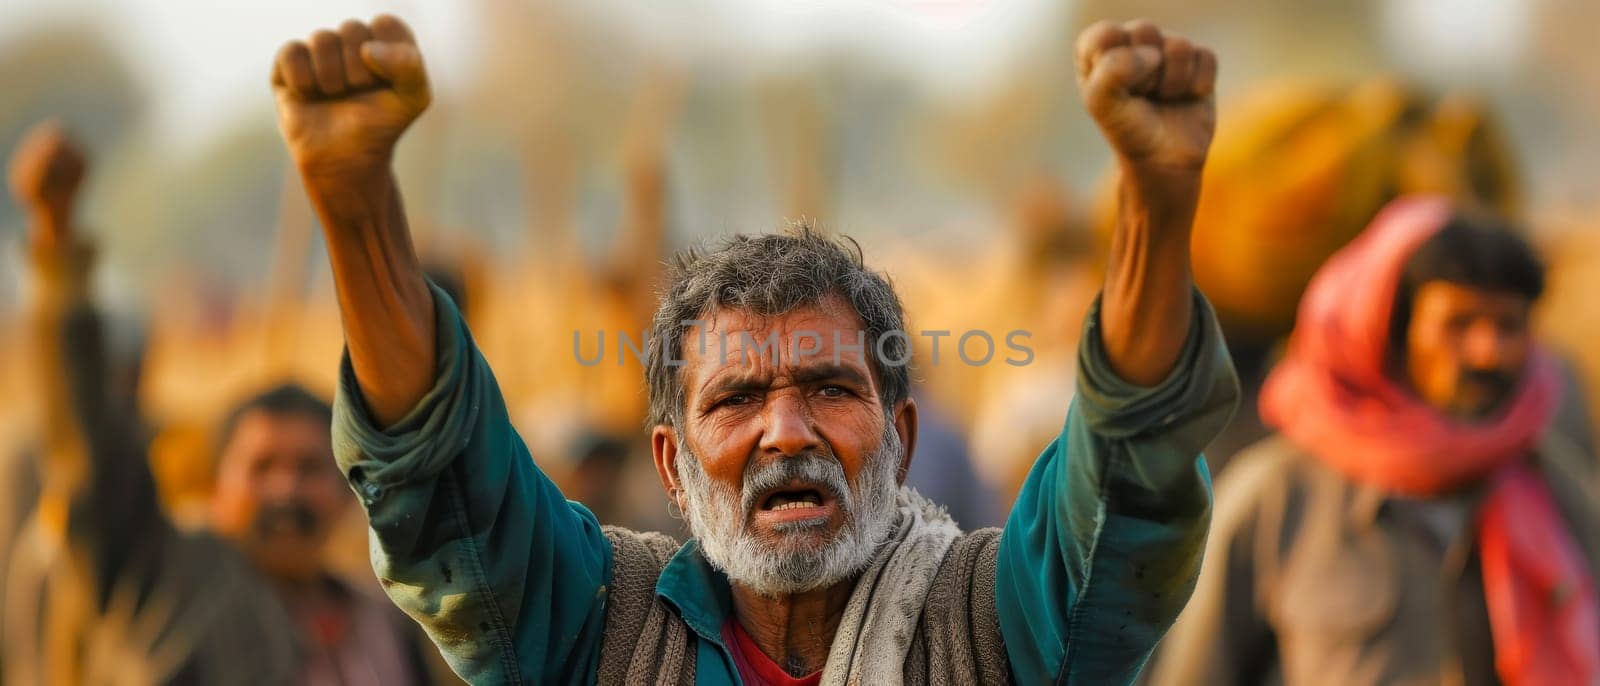 Middle-aged protester with fierce expression, raising his fist in a call for action. by sfinks